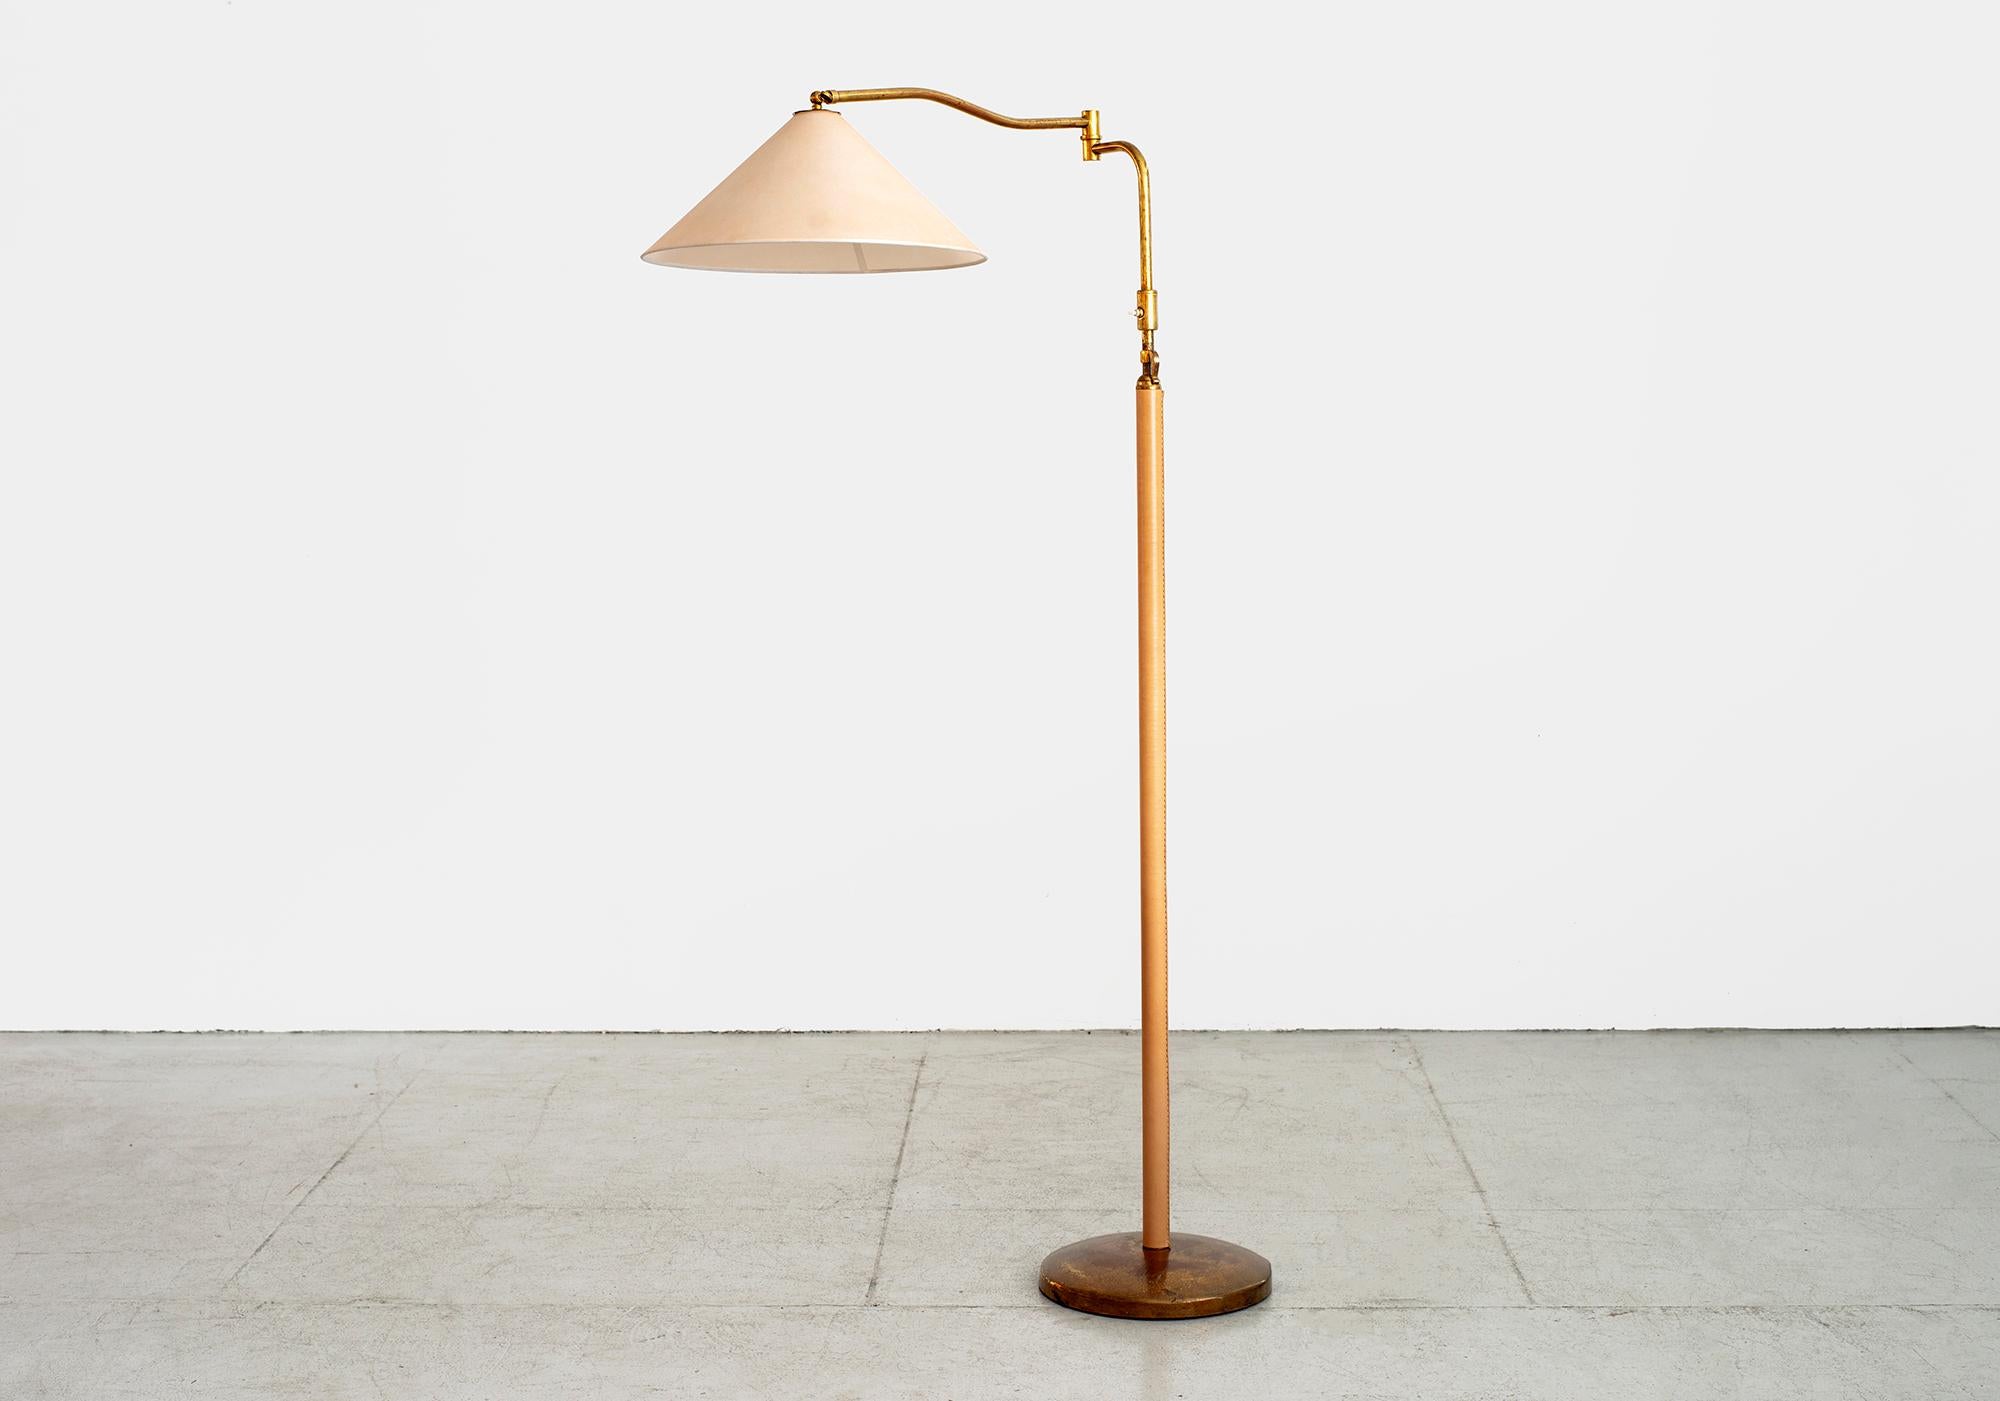 Beautiful floor lamp attributed to Arredoluce. 
Articulating and adjustable with great brass patina throughout and light tan leather stem. 
Top arm pivots and extends with wonderful brass joint. 
New silk shade and newly rewired.